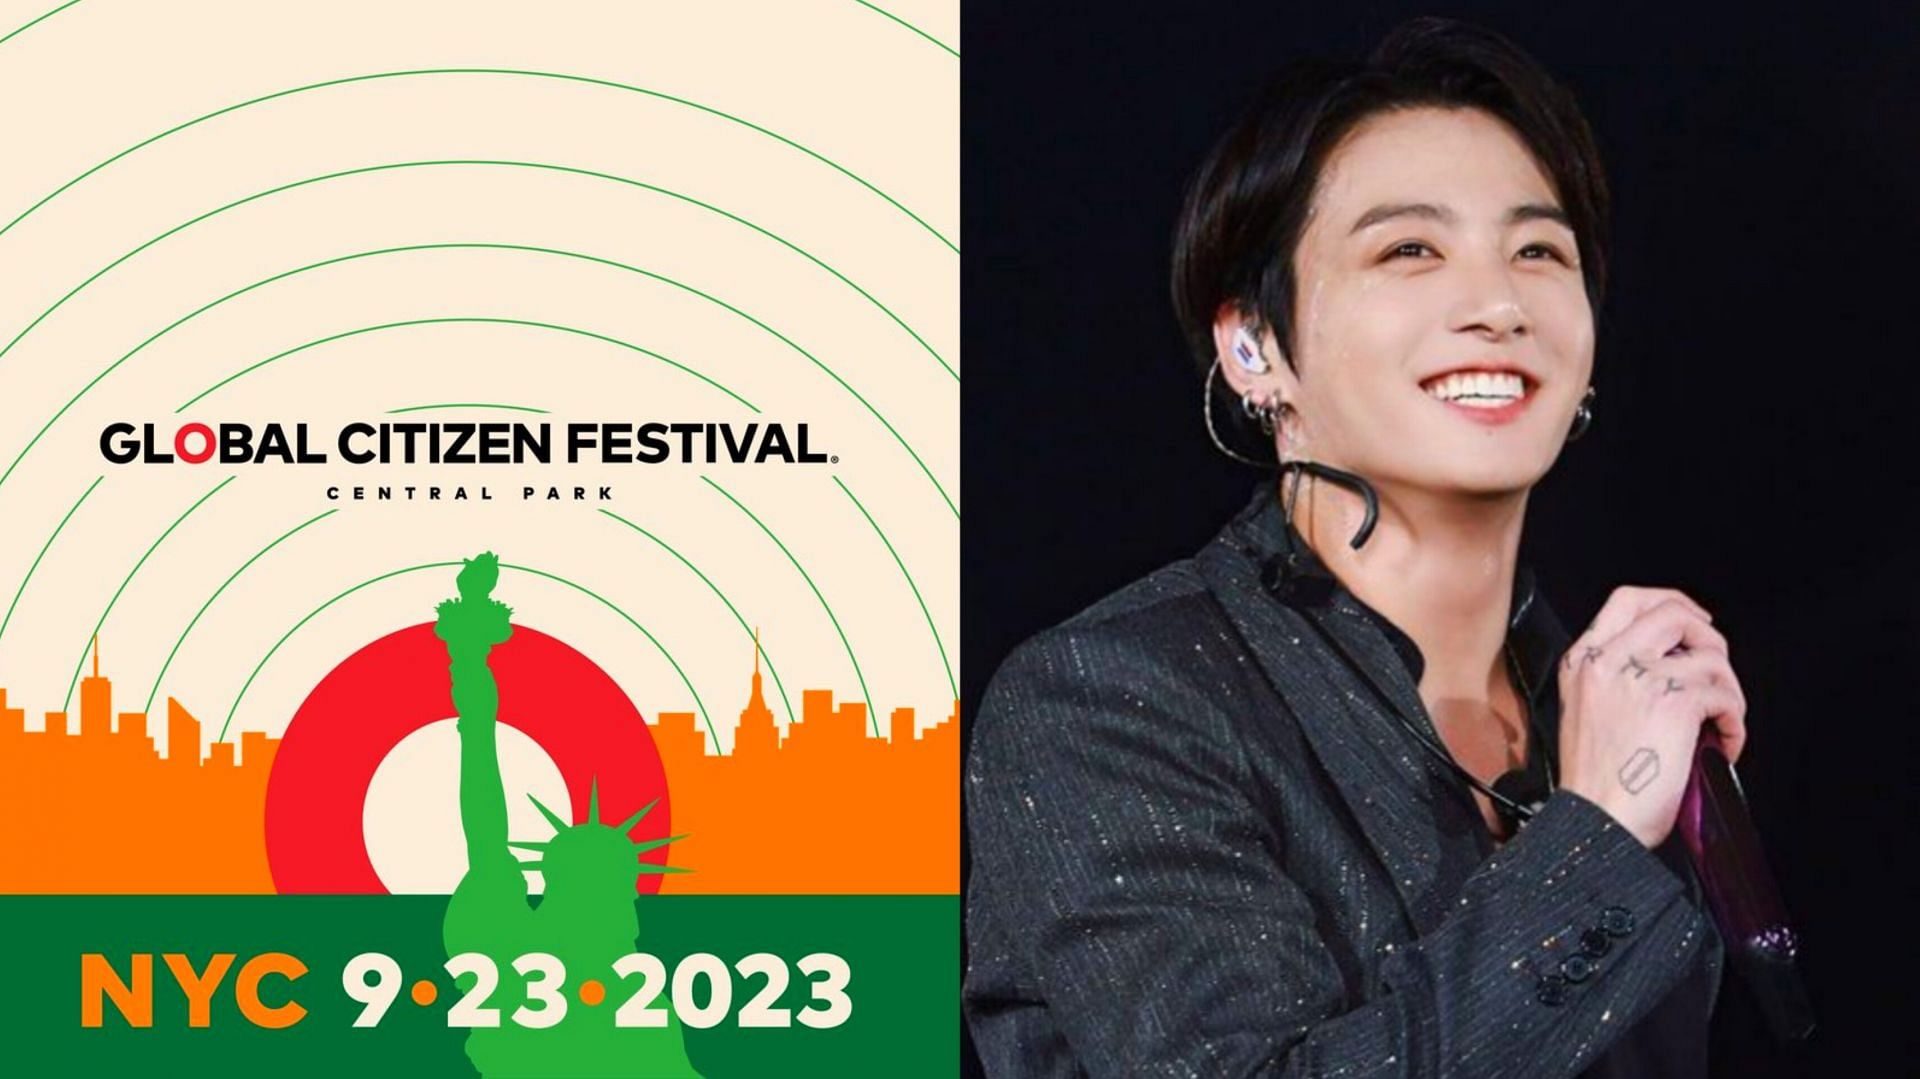 Featuring Jungkook (Image via Global Citizen and Bighit Entertainment)